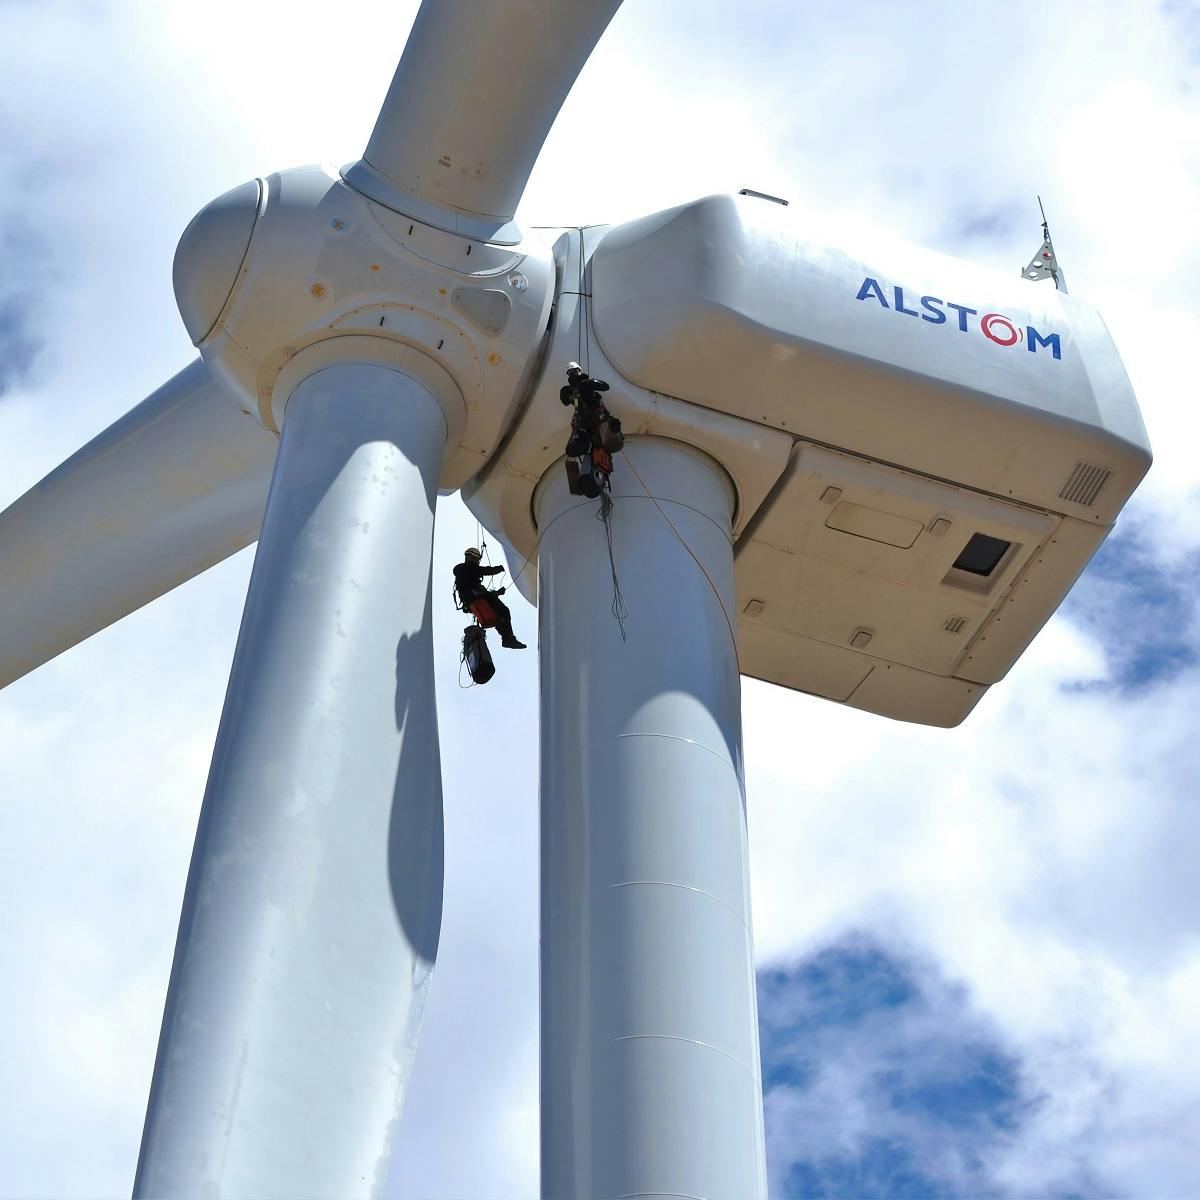 Two men on ropes maintaining a wind turbine